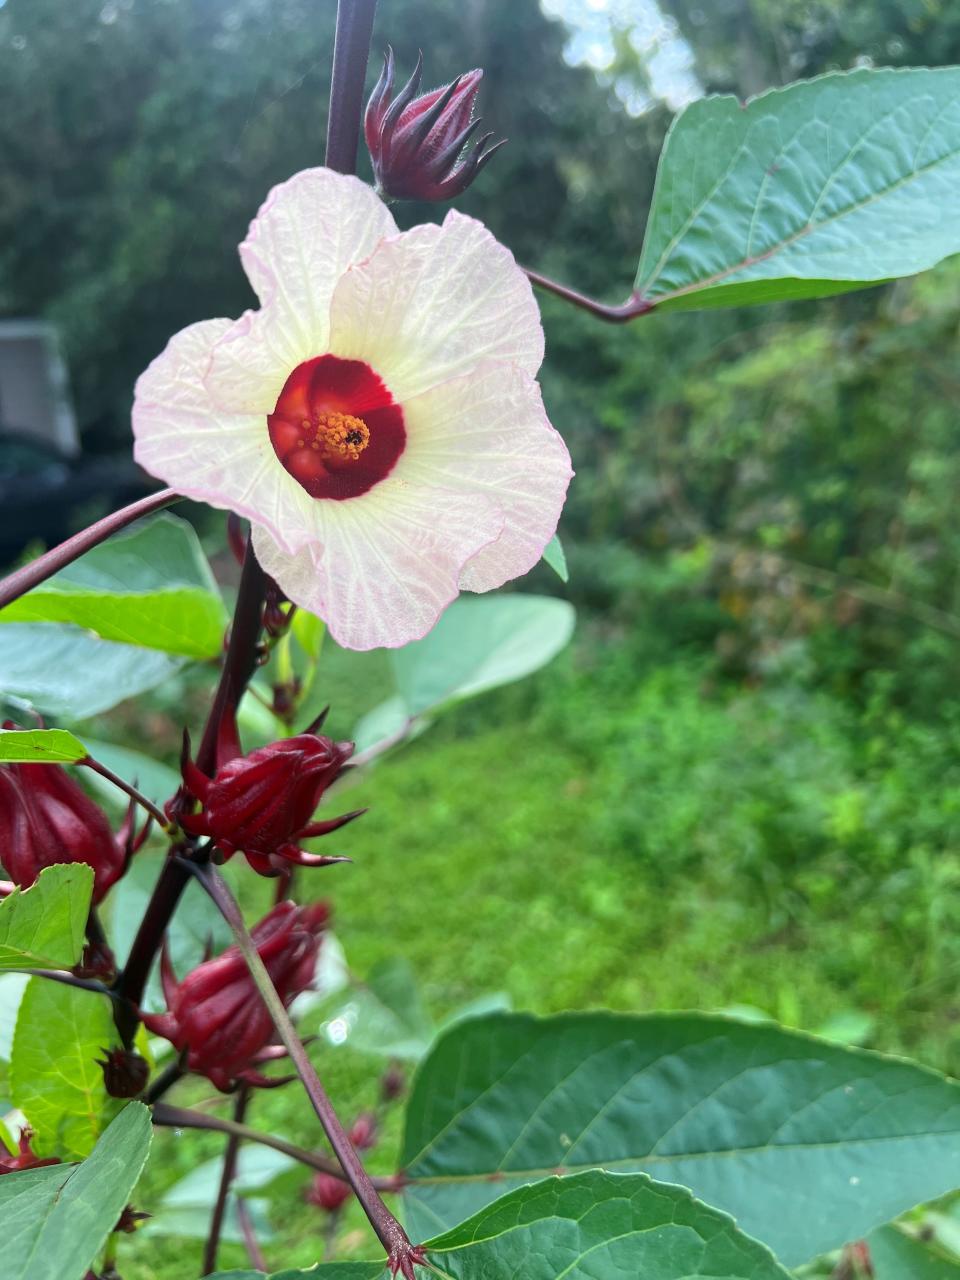 Roselle is a popular plant every year! It's a beautiful plant in the hibiscus family and is good for teas (and eating!).